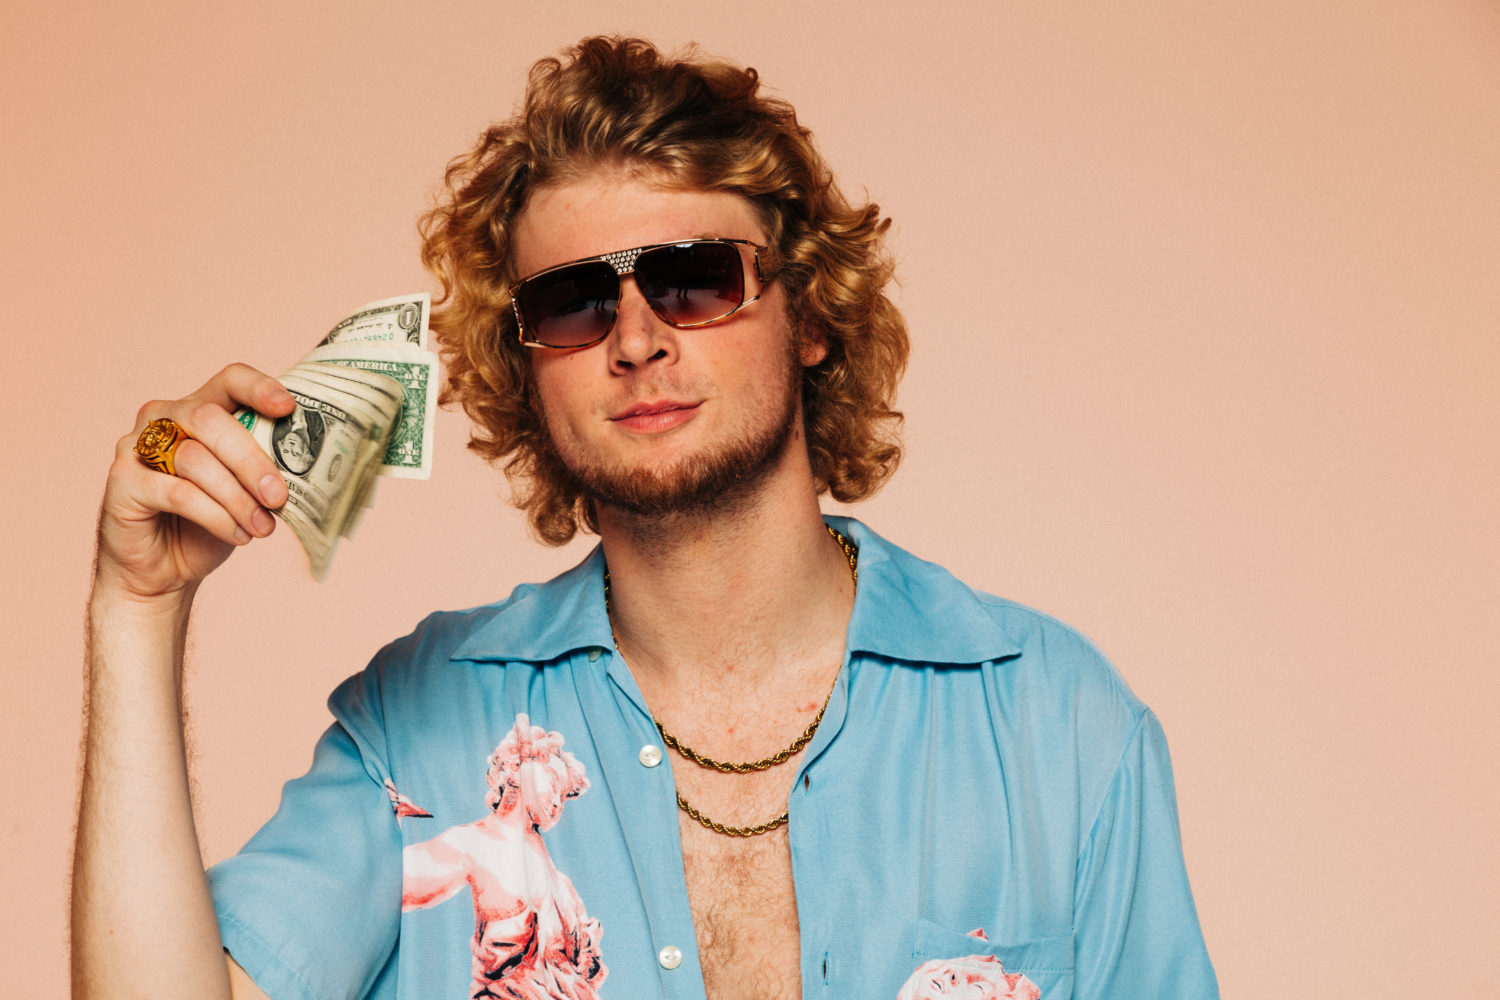 If you enjoy Yung Gravy's music, you'll find these tracks captivating